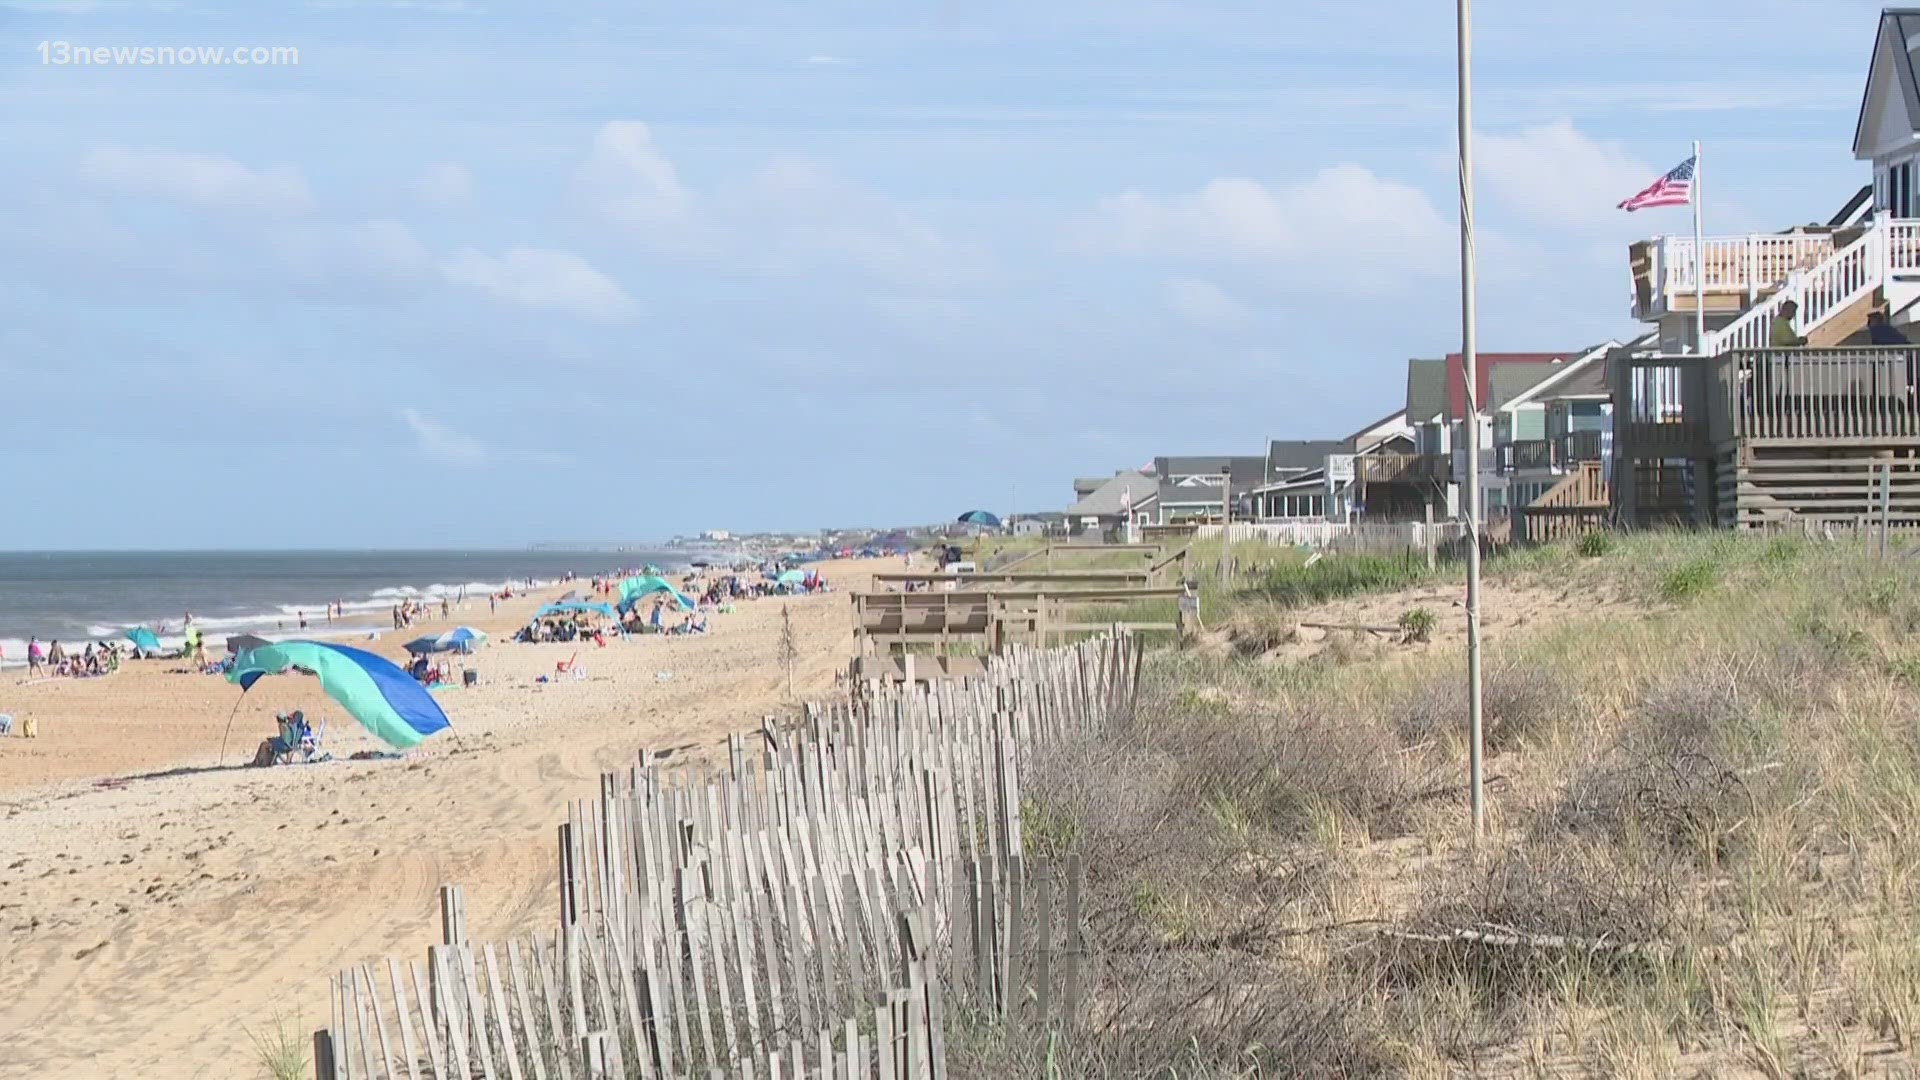 A 17-year-old boy died Saturday after being trapped under several feet of sand, according to the National Park Service.